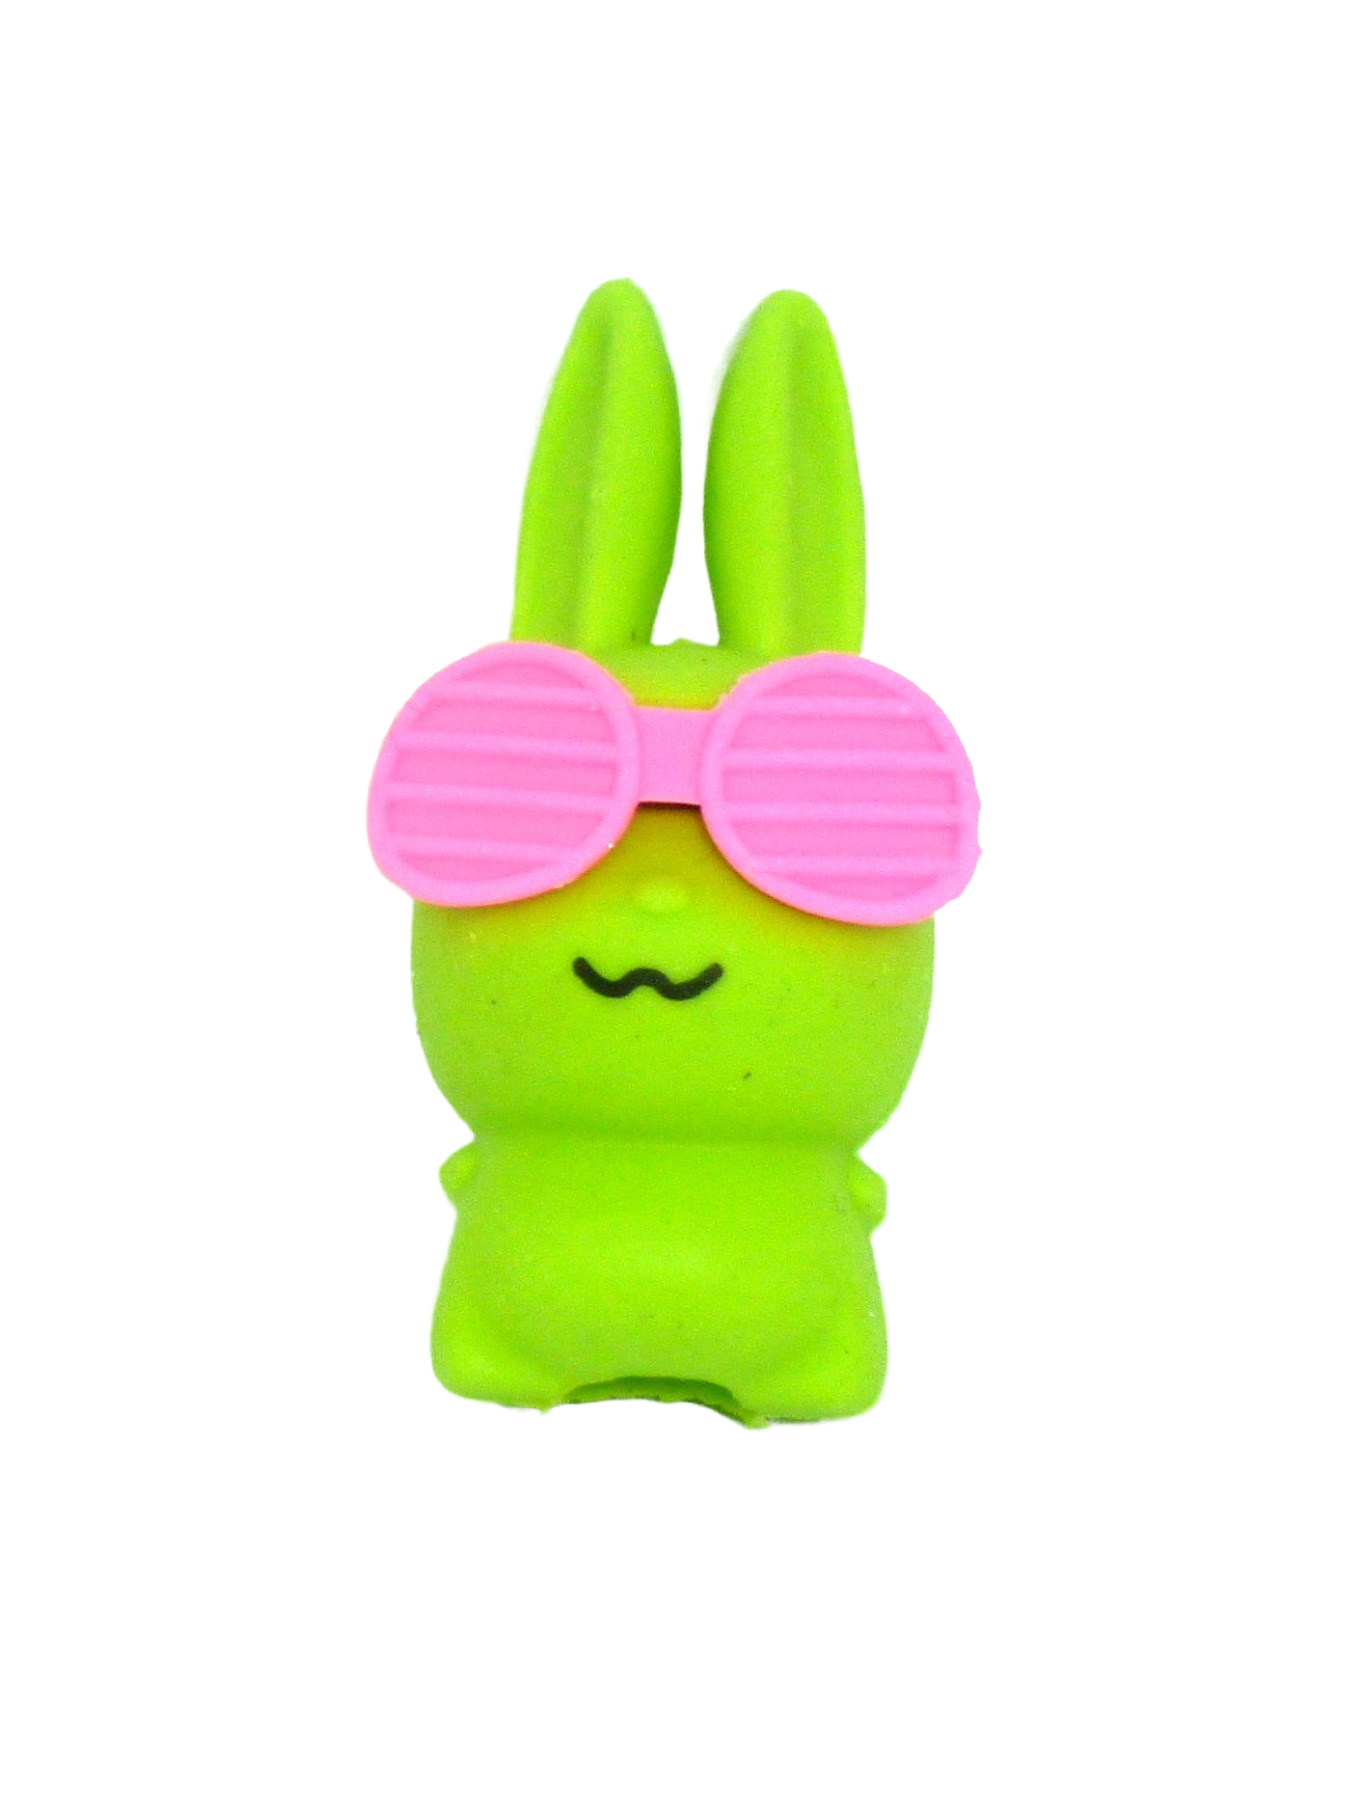 Green bunny with sunglasses - eraser